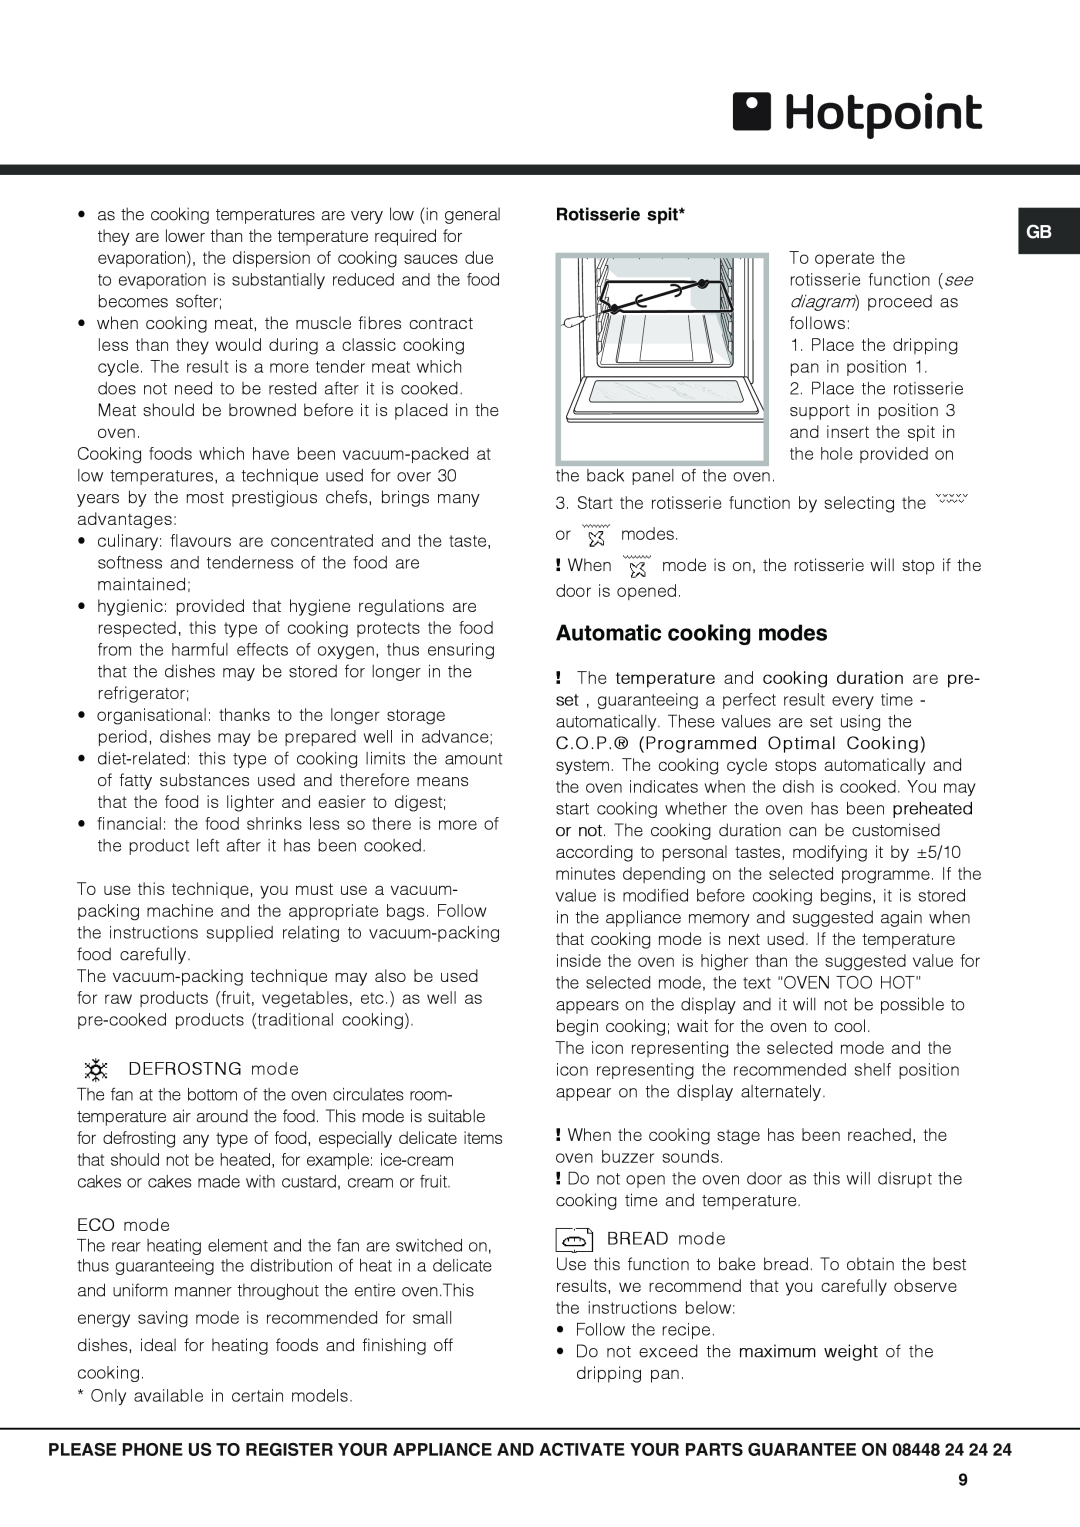 Hotpoint SX 1046Q PX, SX1046L PX operating instructions Automatic cooking modes 